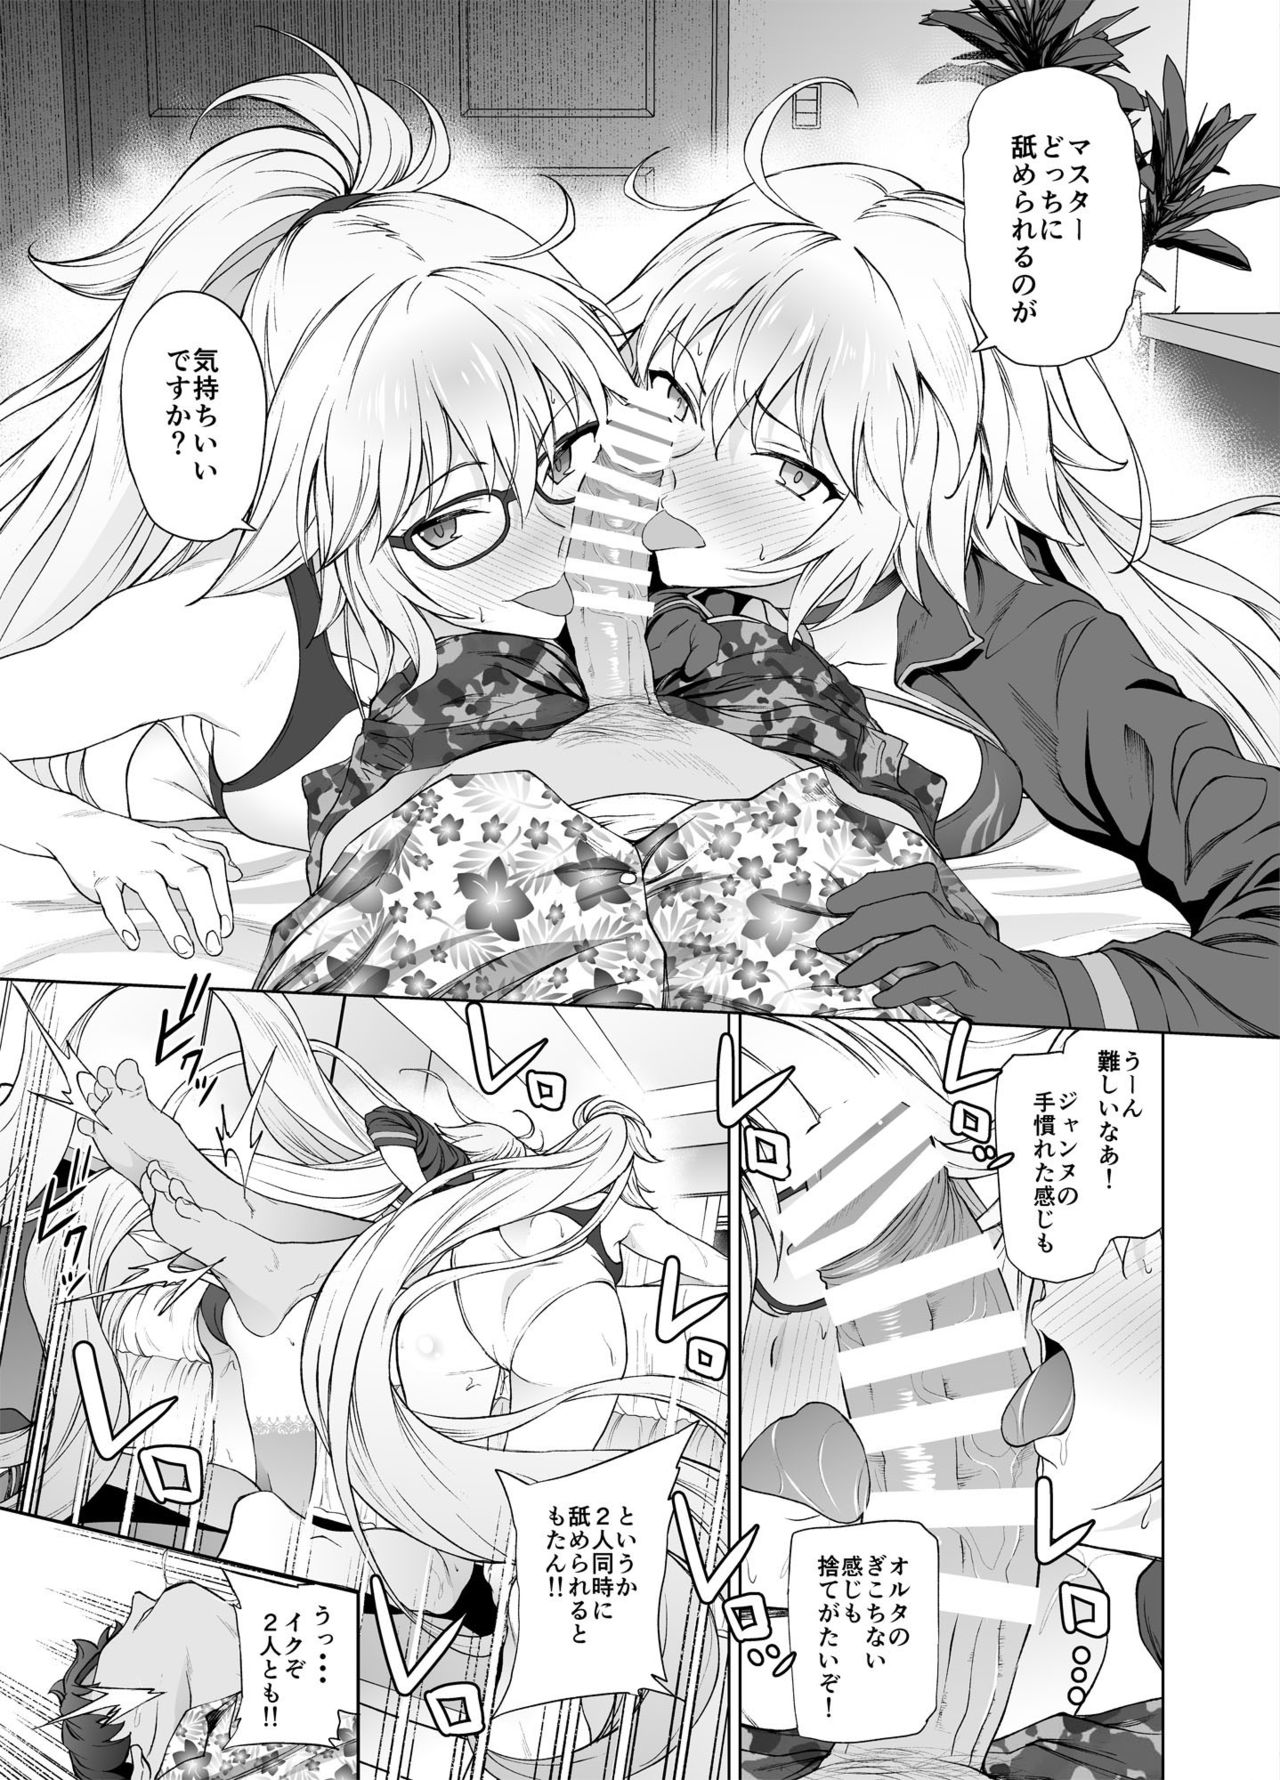 [EXTENDED PART (Endo Yoshiki)] Jeanne W (Fate/Grand Order) [Digital] page 28 full